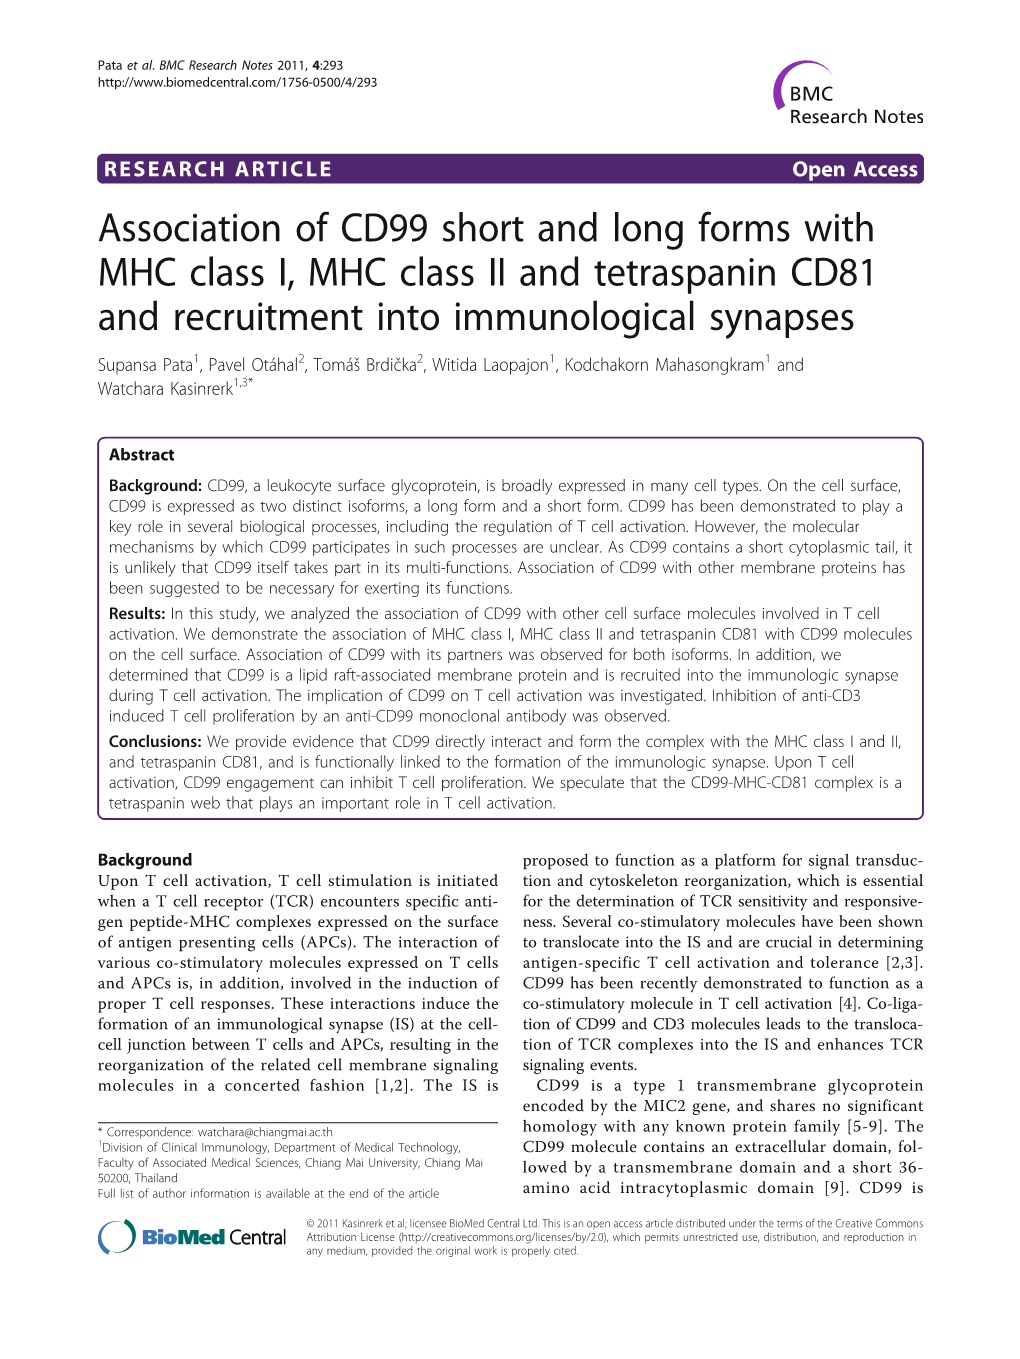 Association of CD99 Short and Long Forms with MHC Class I, MHC Class